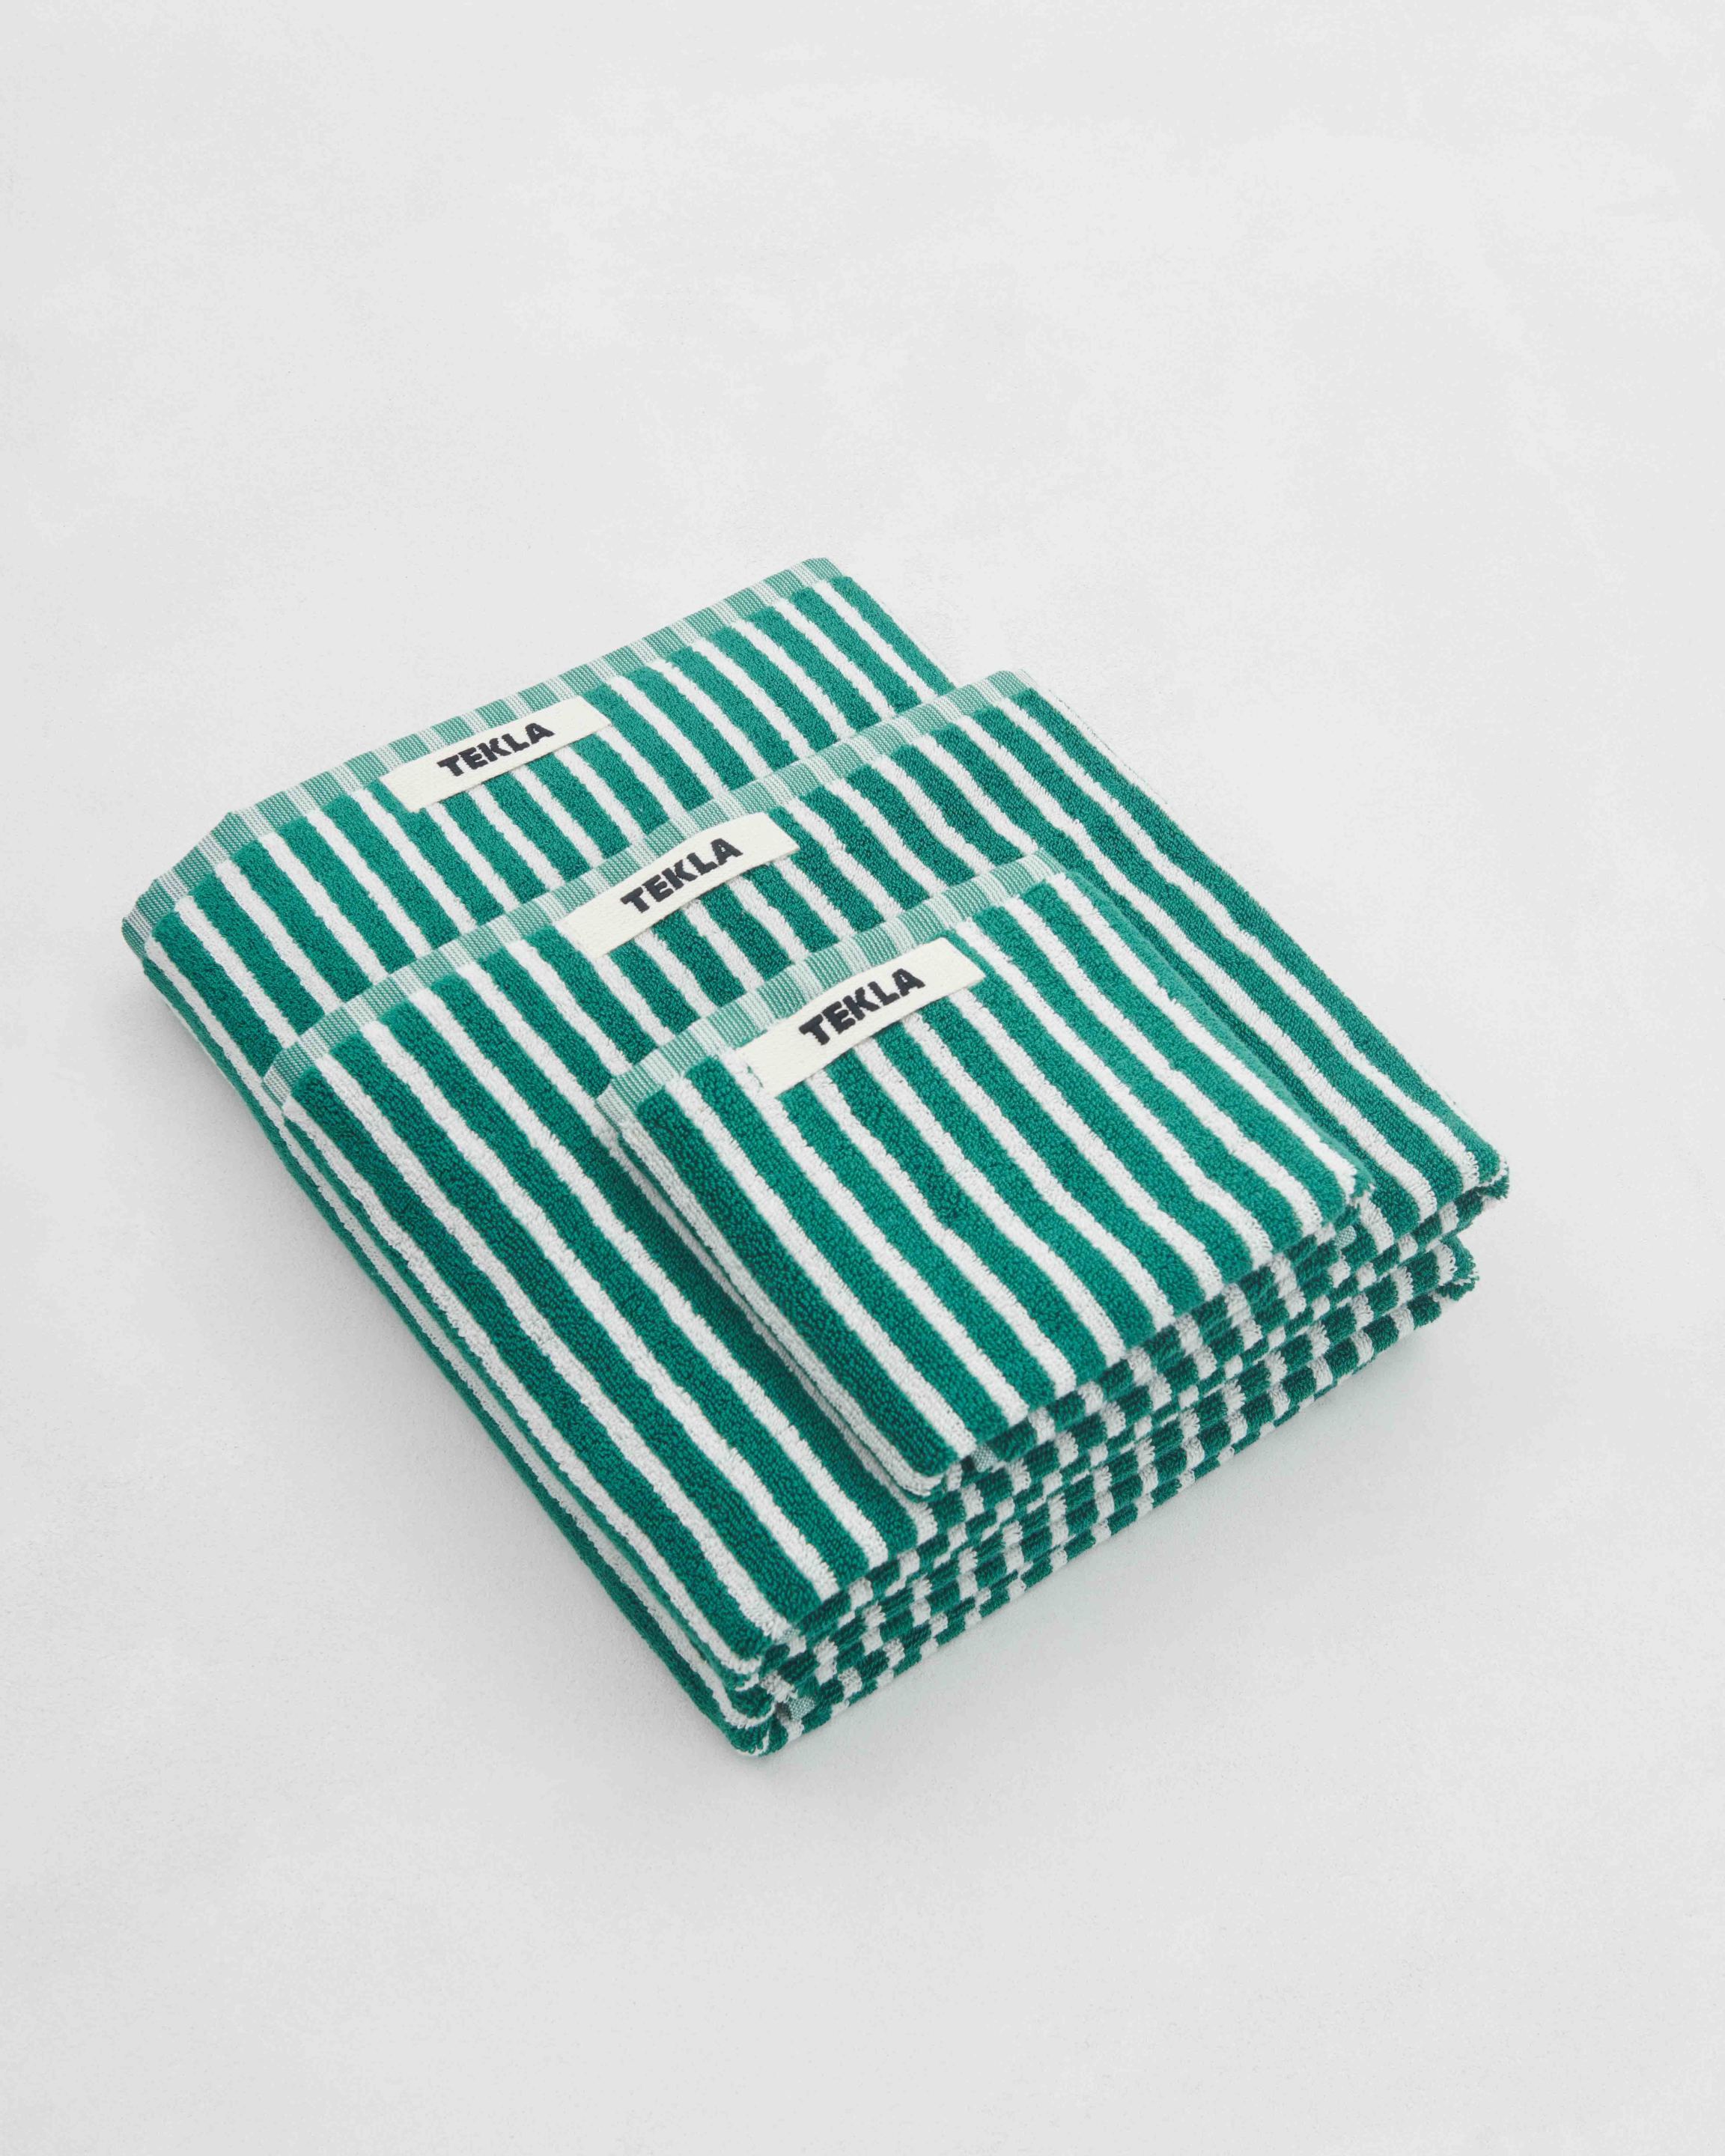 Terry towel - Teal Green Stripes